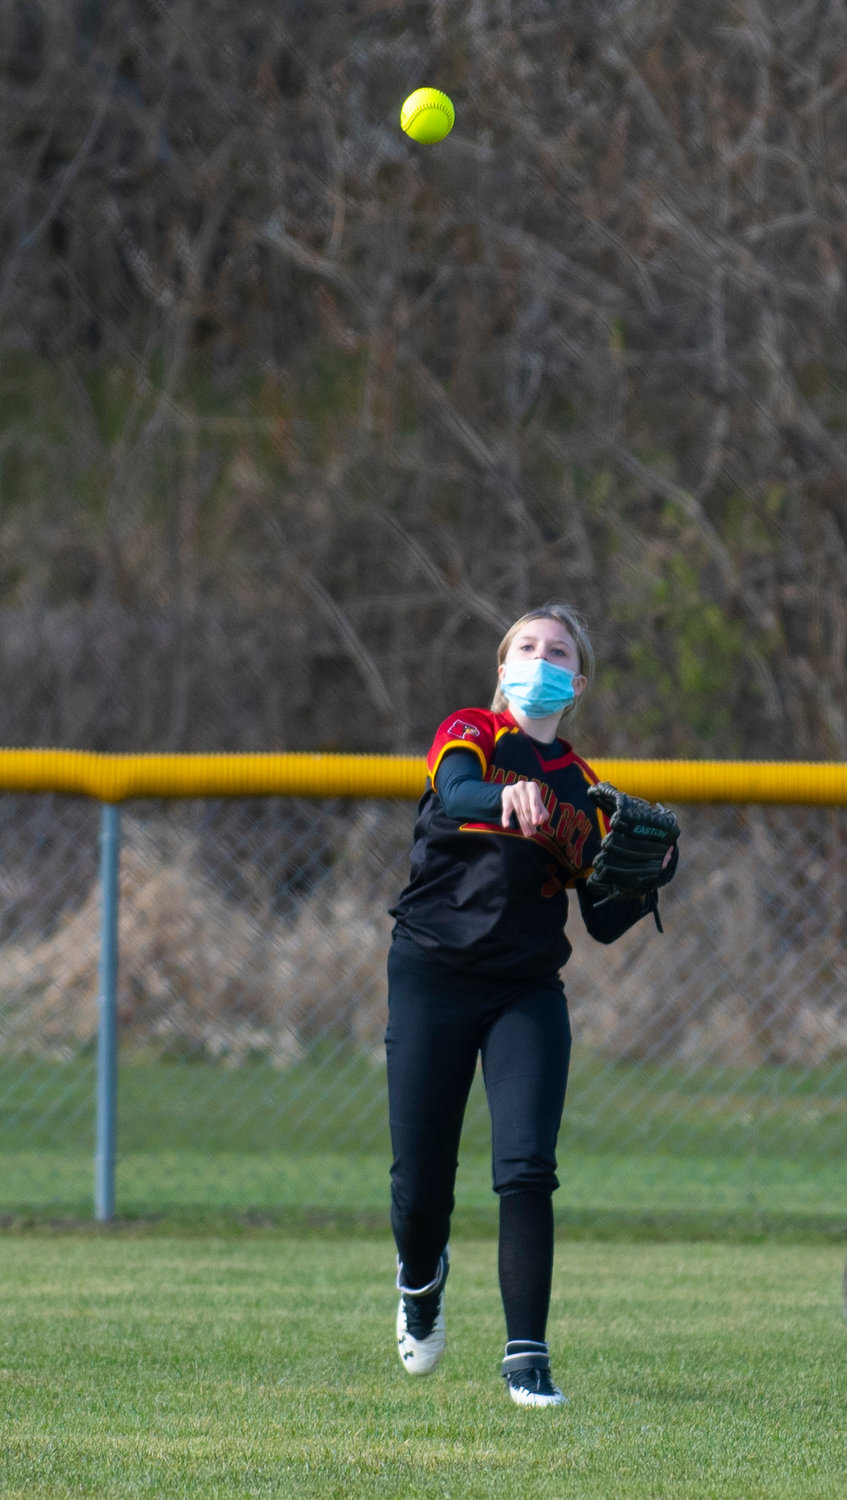 A Winlock player makes a throw from the outfield against Adna on Friday.